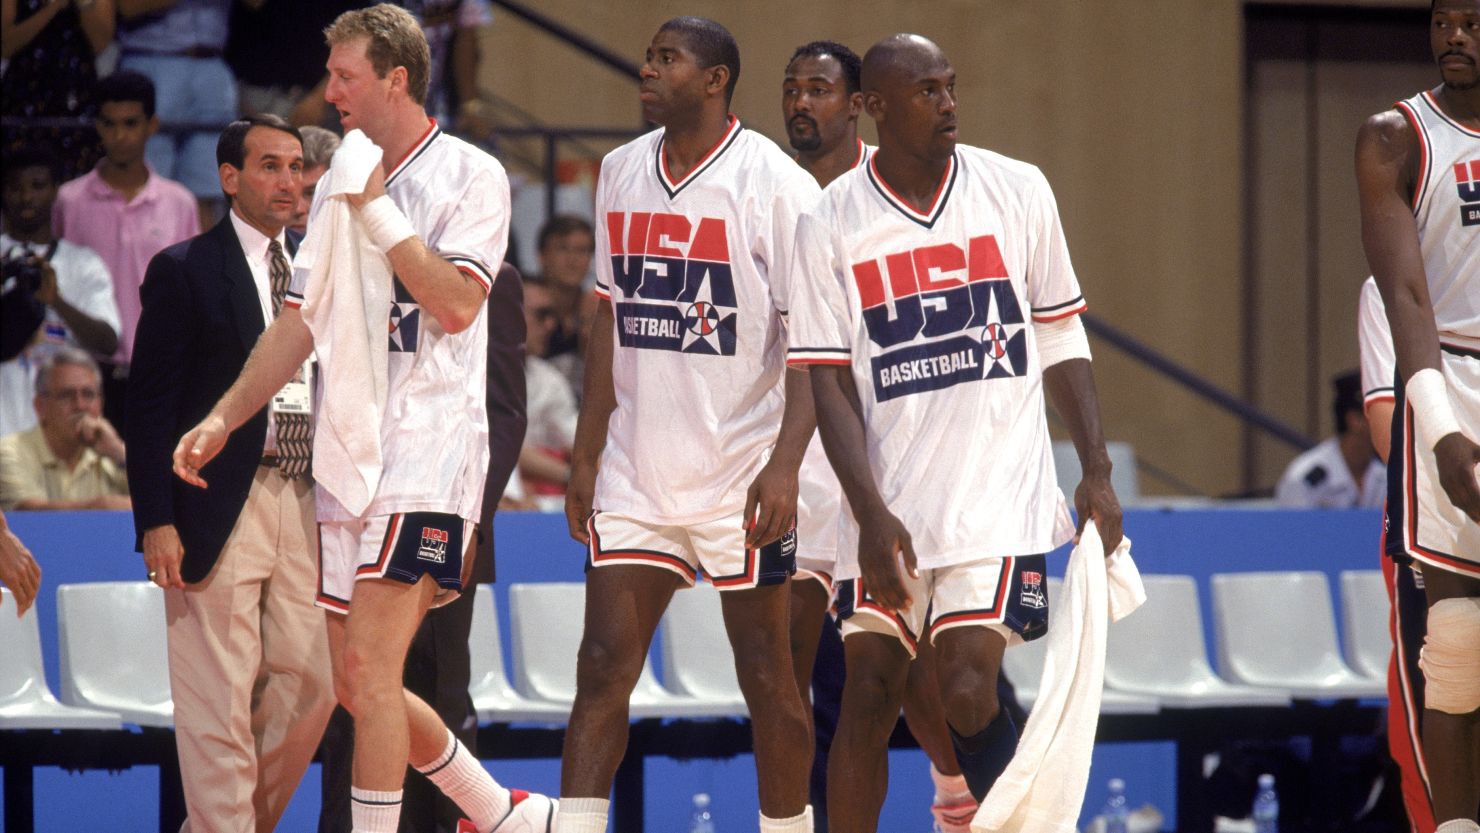 Larry Bird, from left, Magic Johnson and Michael Jordan of the USA  "Dream Team" walk on court at the 1992 Olympics.